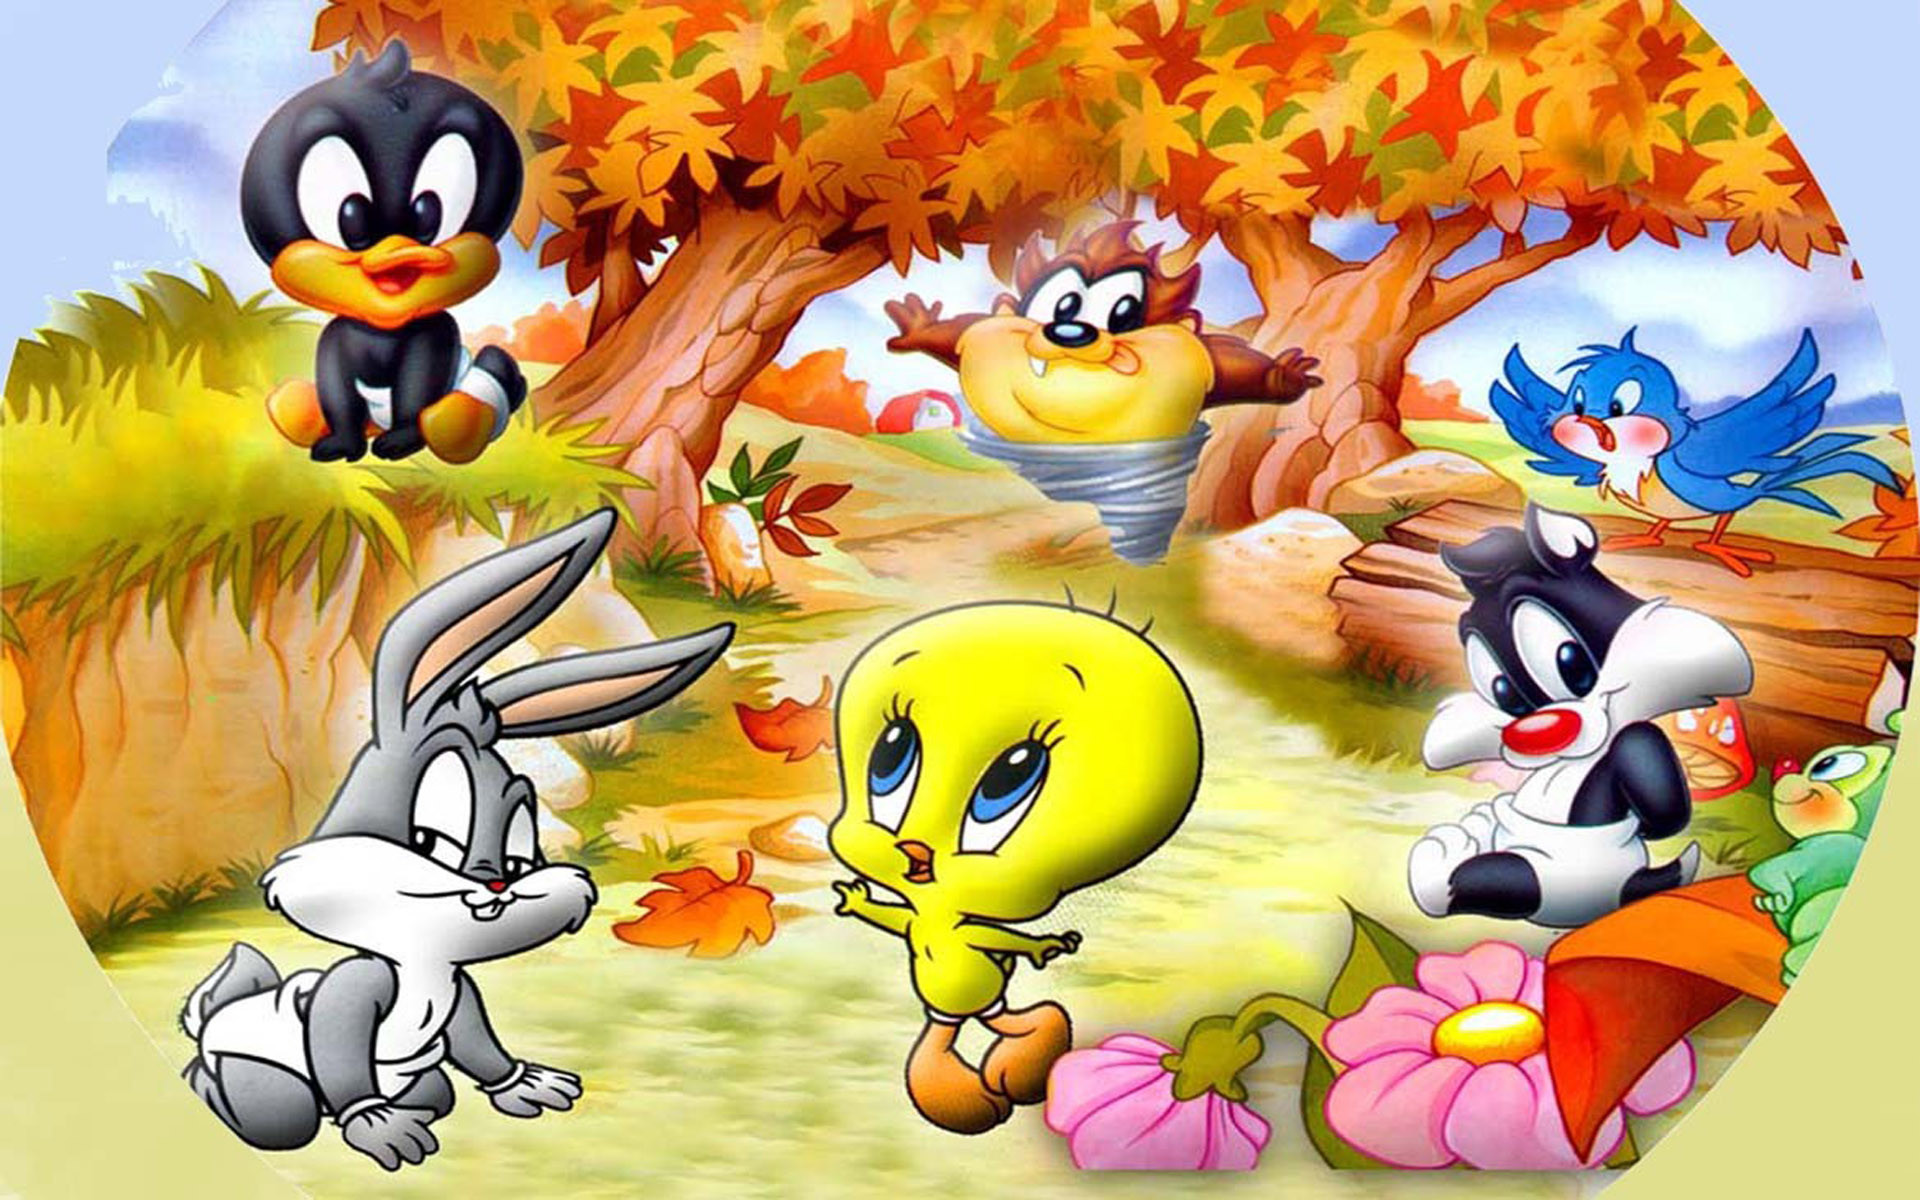 1920x1200 Characters Looney Tunes Baby Tweety Daffy Duck Bugs Bunny Sylvester The Cat  And Tasmanian Devil Full Hd Wallpapers 1920Ã1200